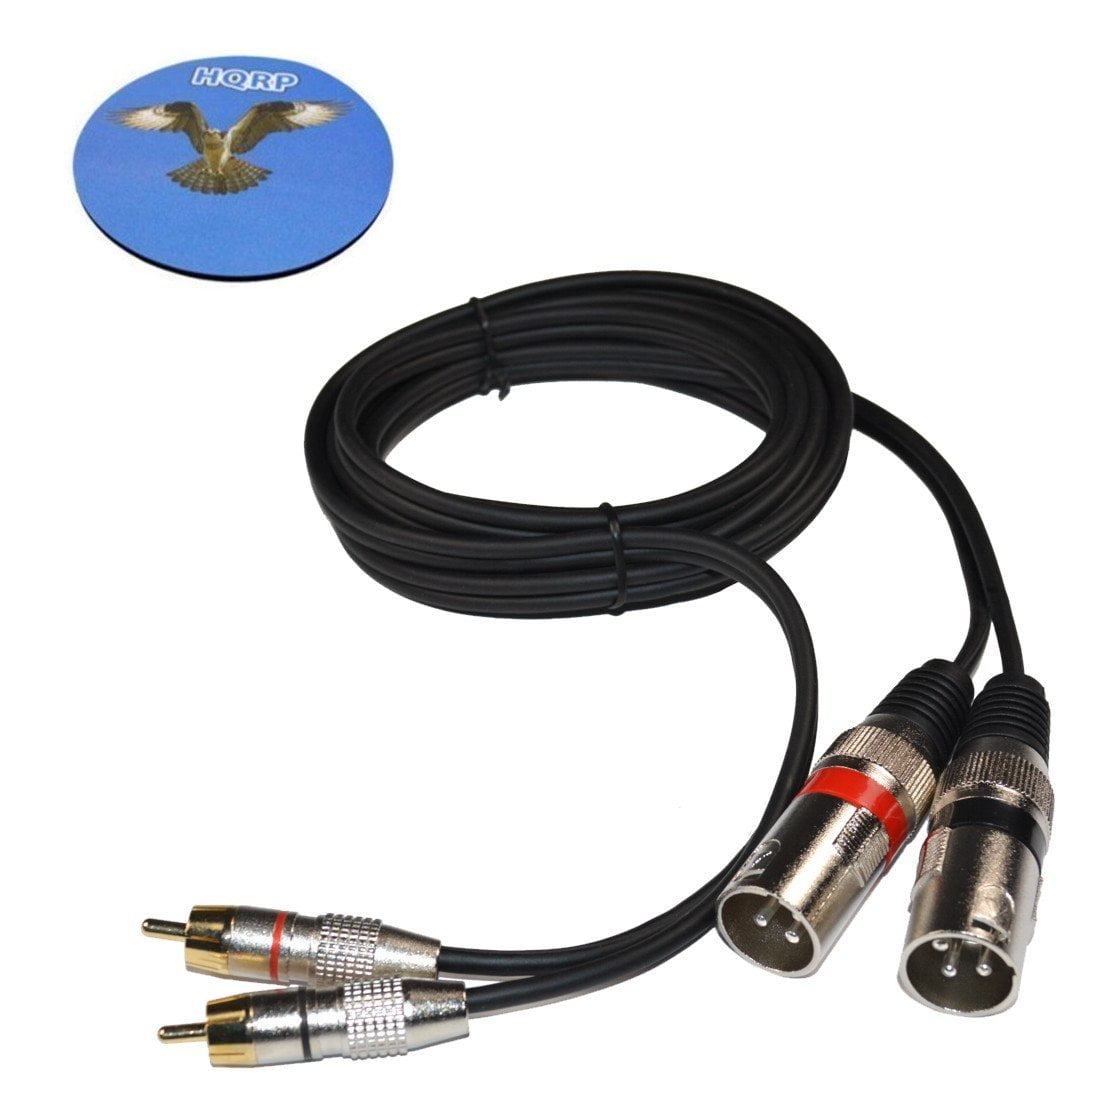 2 x Male XLR to 2 x 1/4" inch Jack Lead Cable 1.5m 5ft 